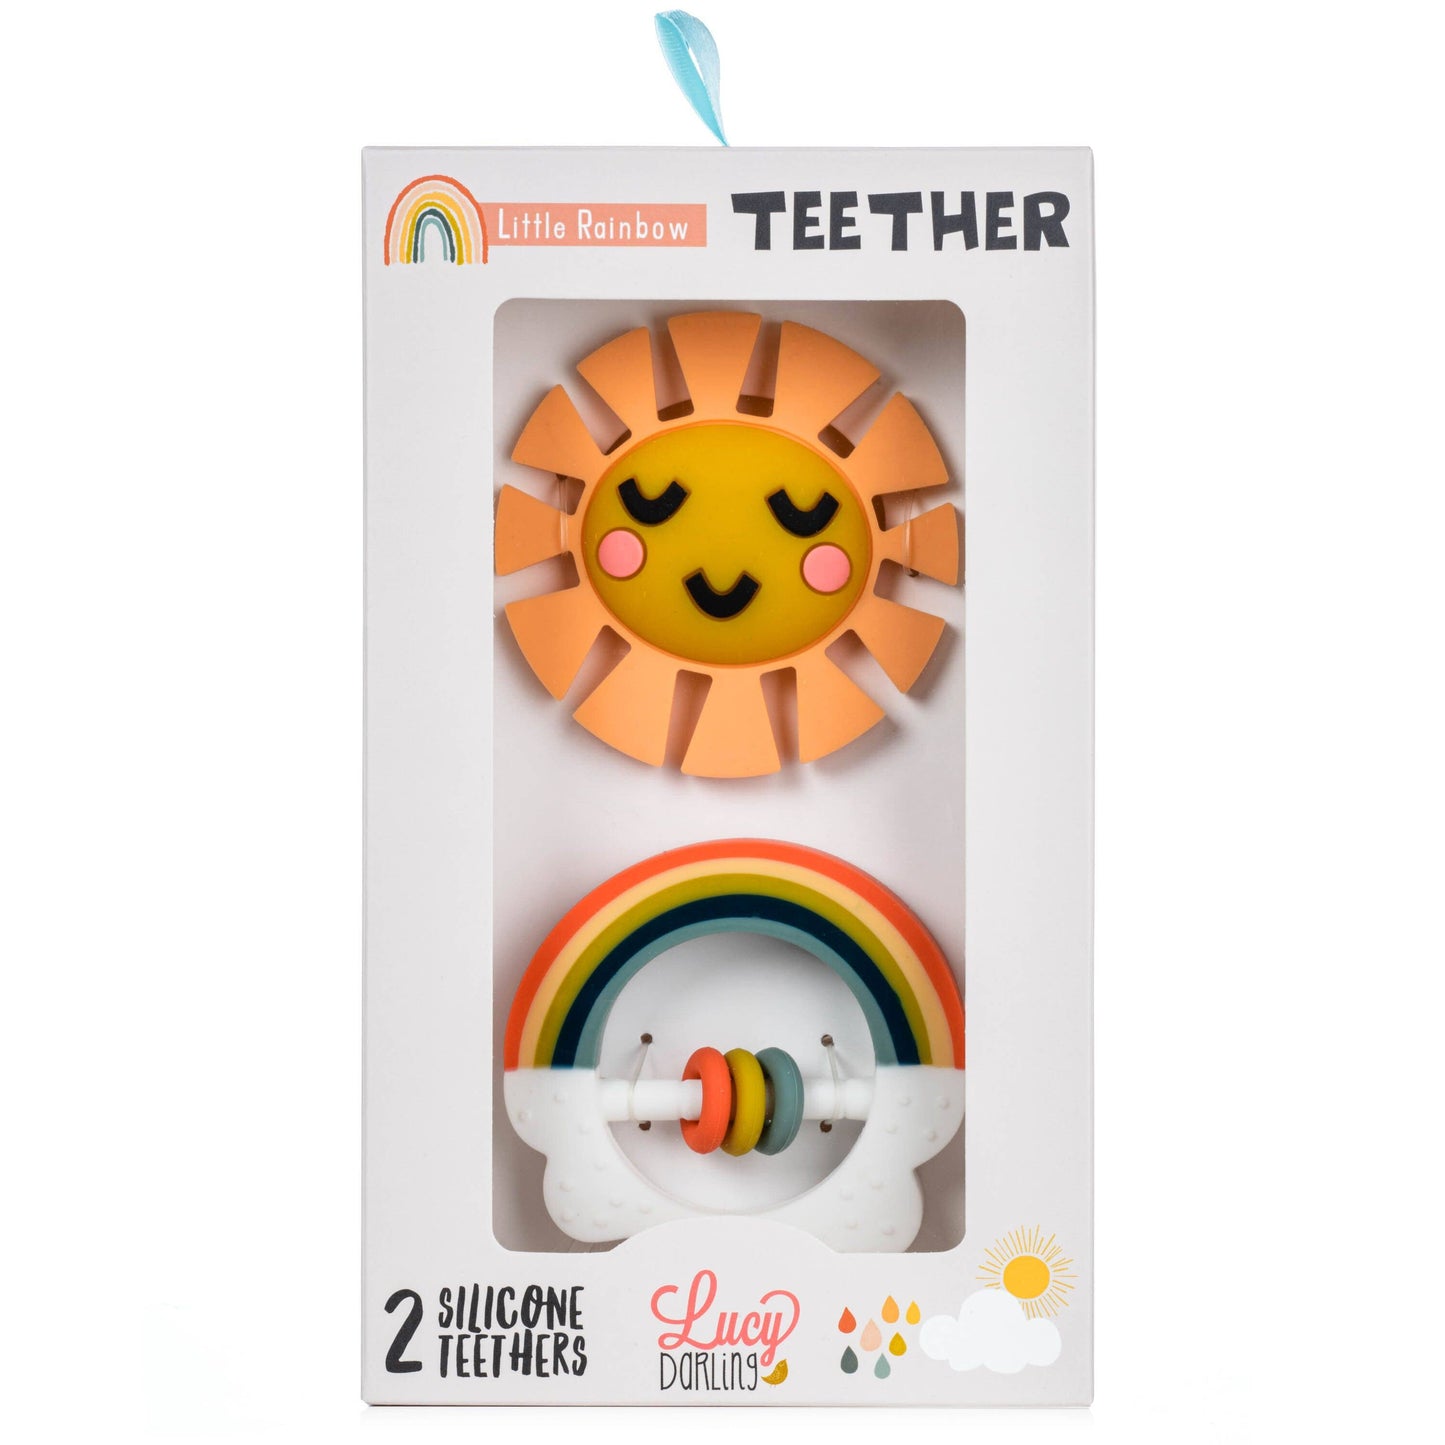 Lucy Darling teether toy